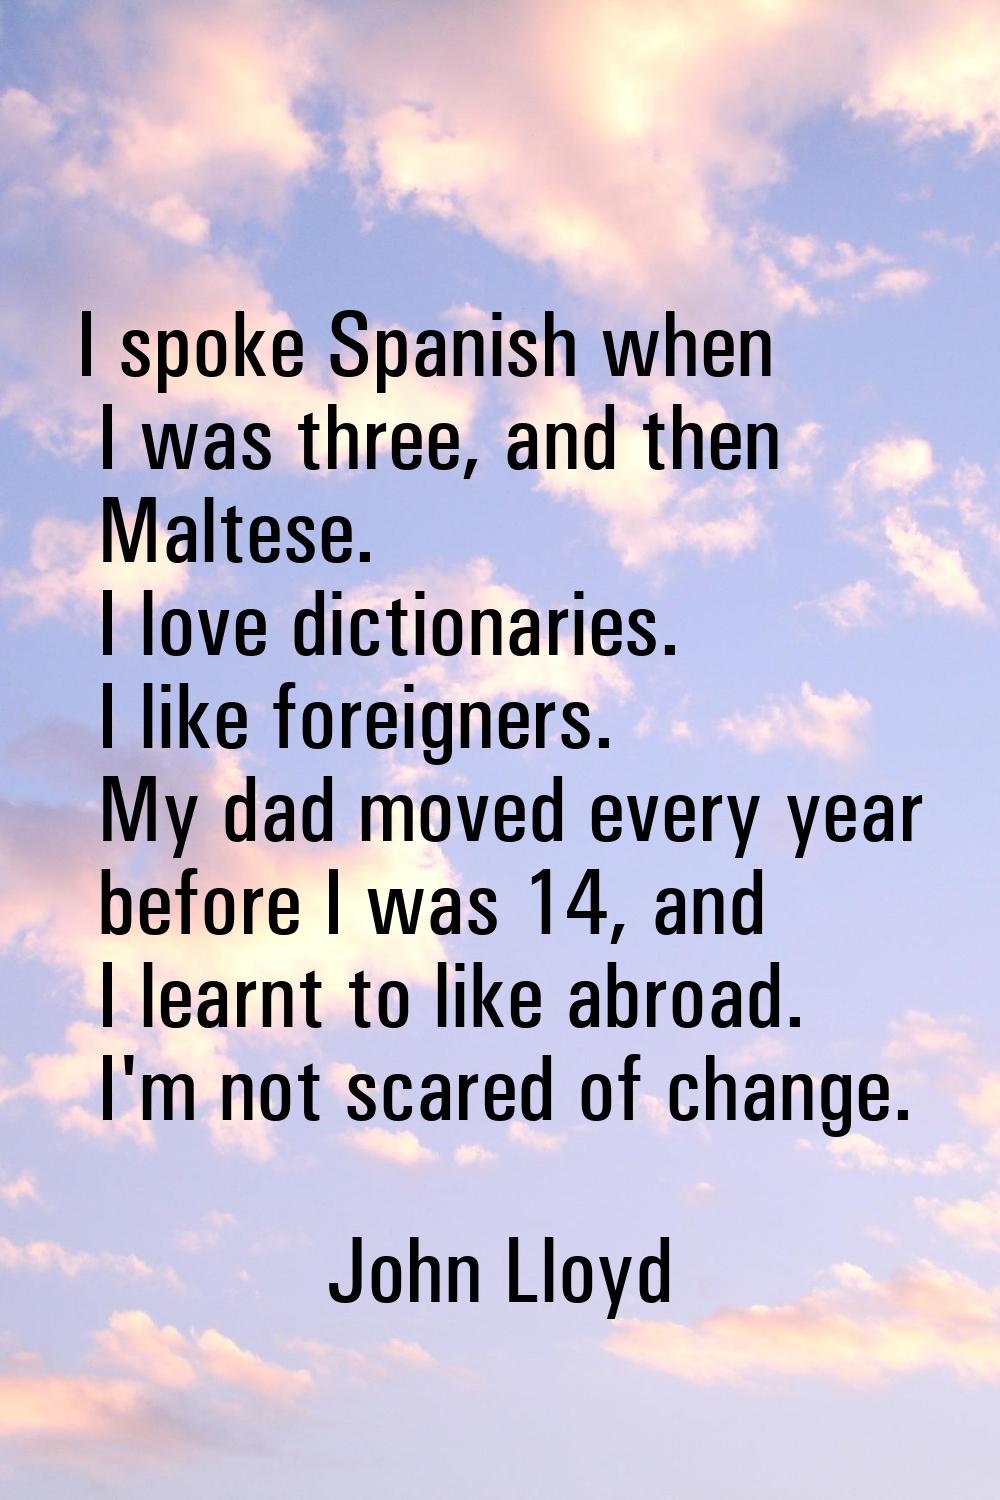 I spoke Spanish when I was three, and then Maltese. I love dictionaries. I like foreigners. My dad 